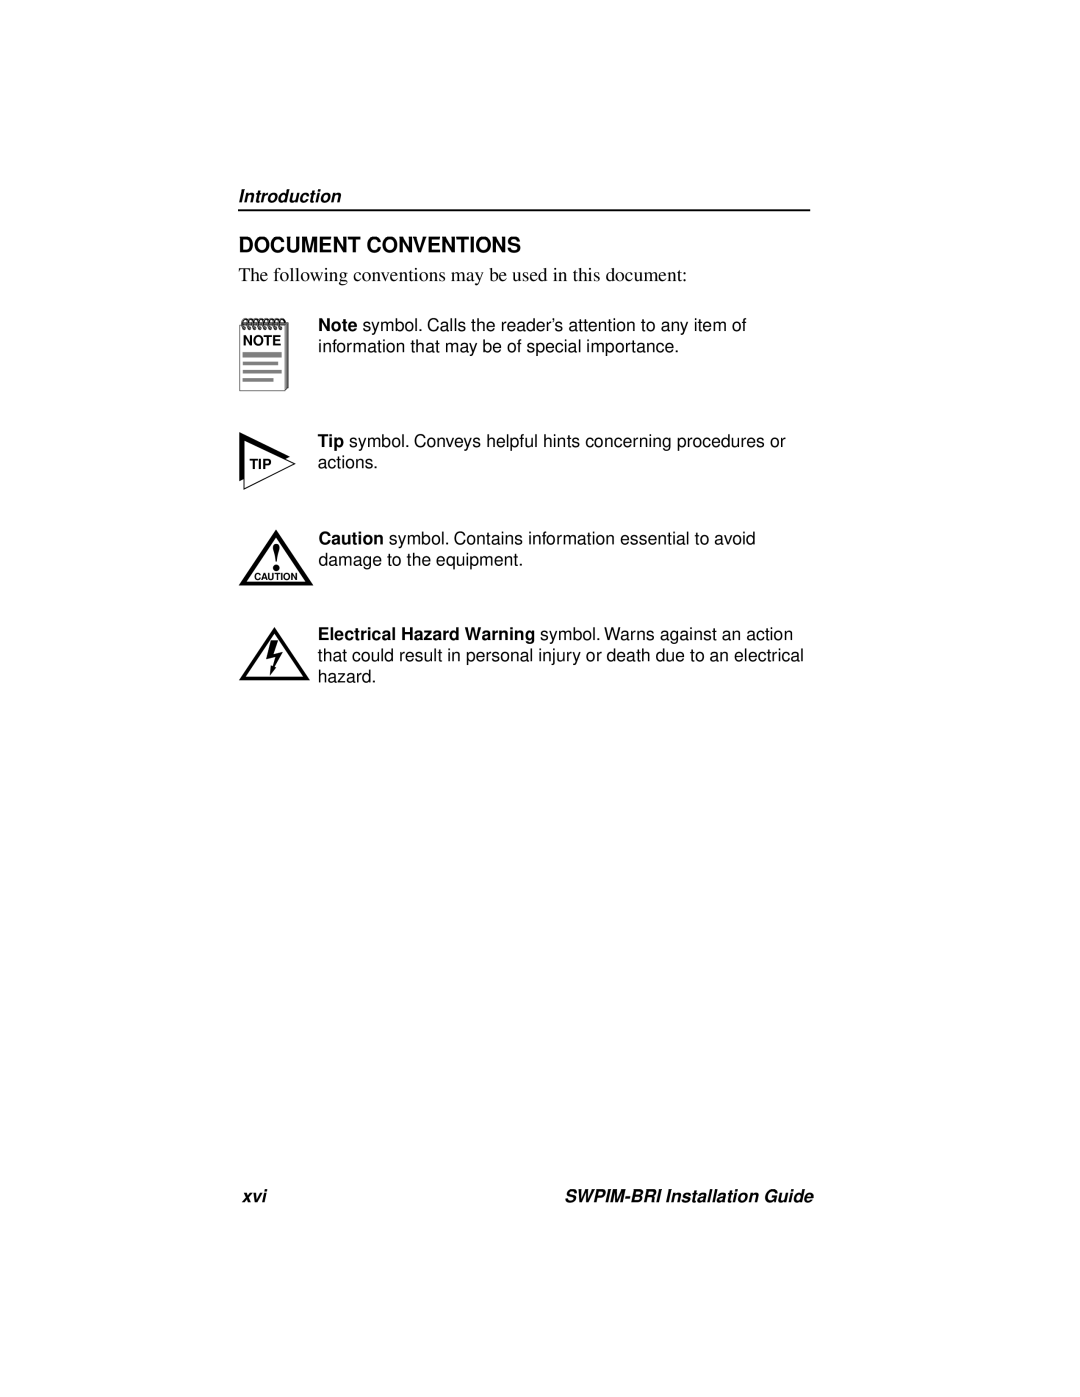 Cabletron Systems SWPIM-BRI Document Conventions, The following conventions may be used in this document, Introduction 